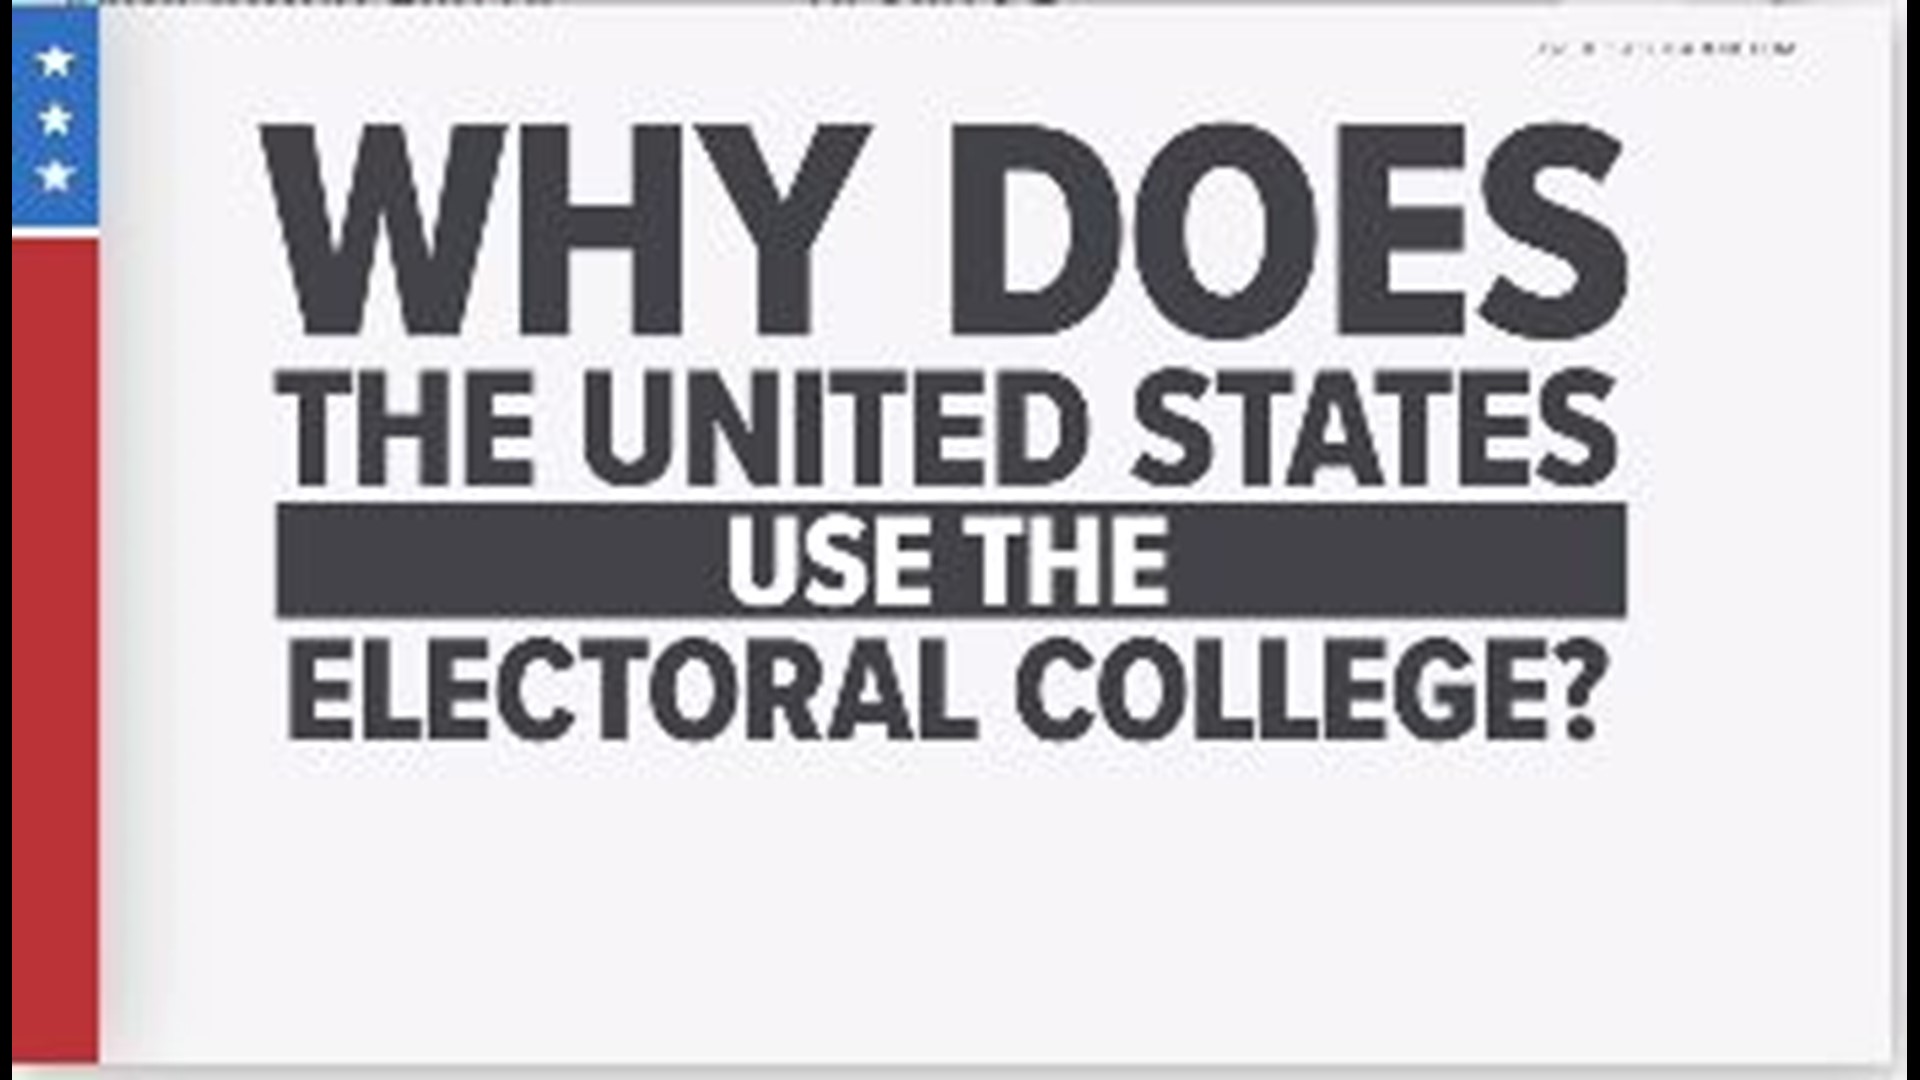 A quick explaination of how the electoral college works and why the United State uses it.